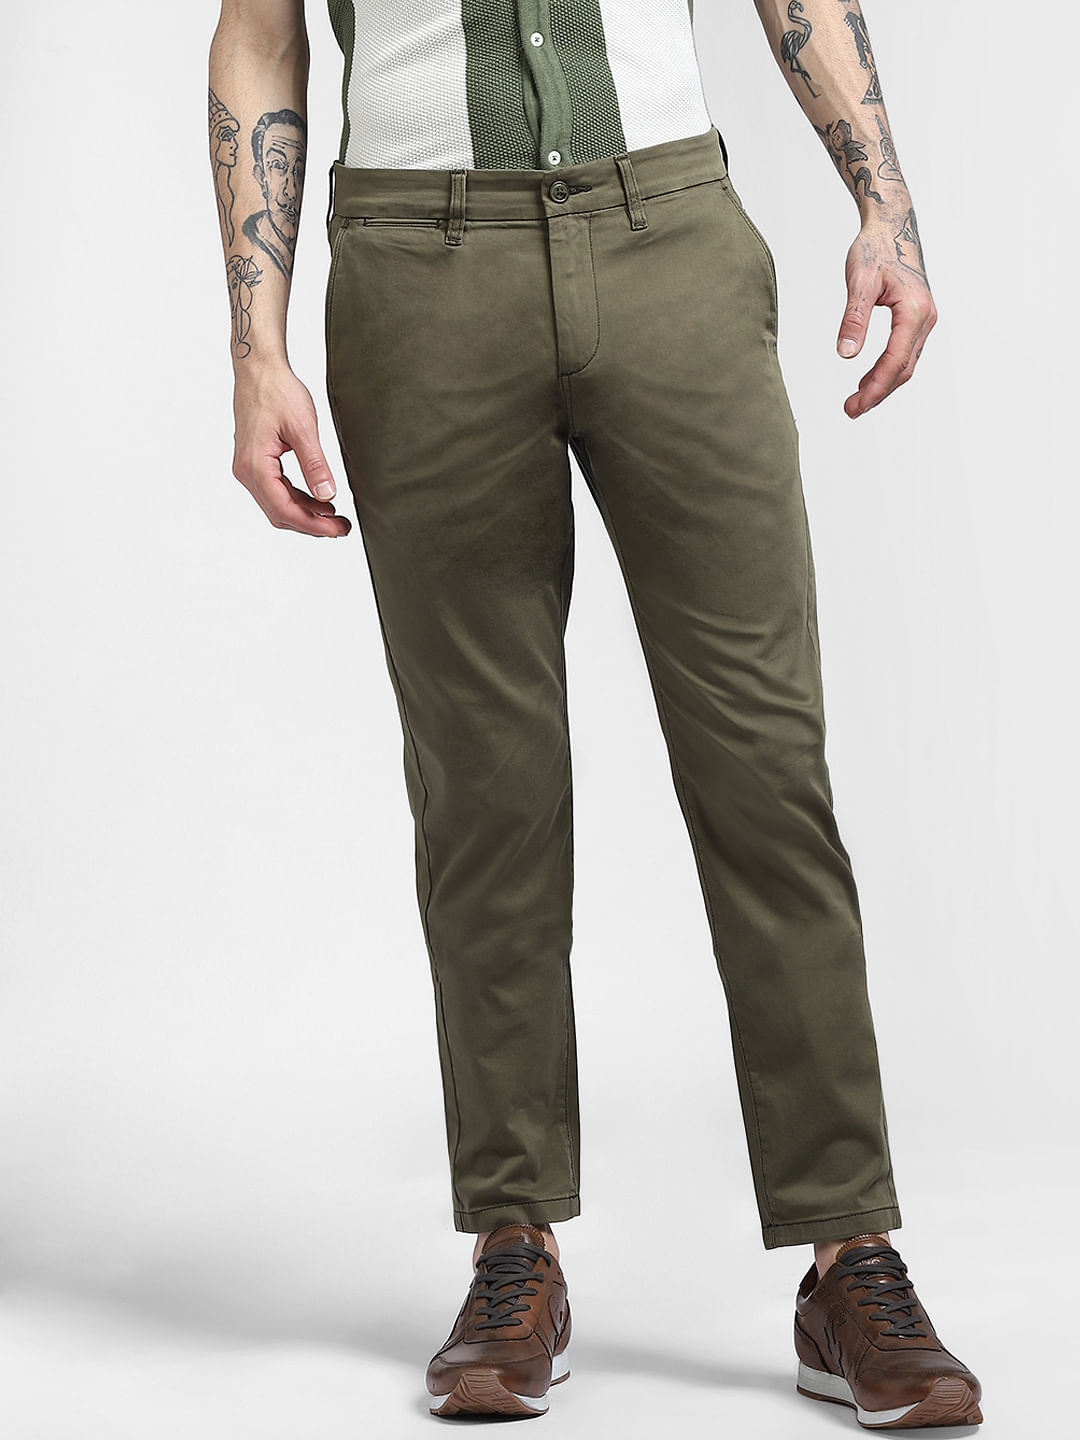 Coloured jeans | Trousers for men | SPF